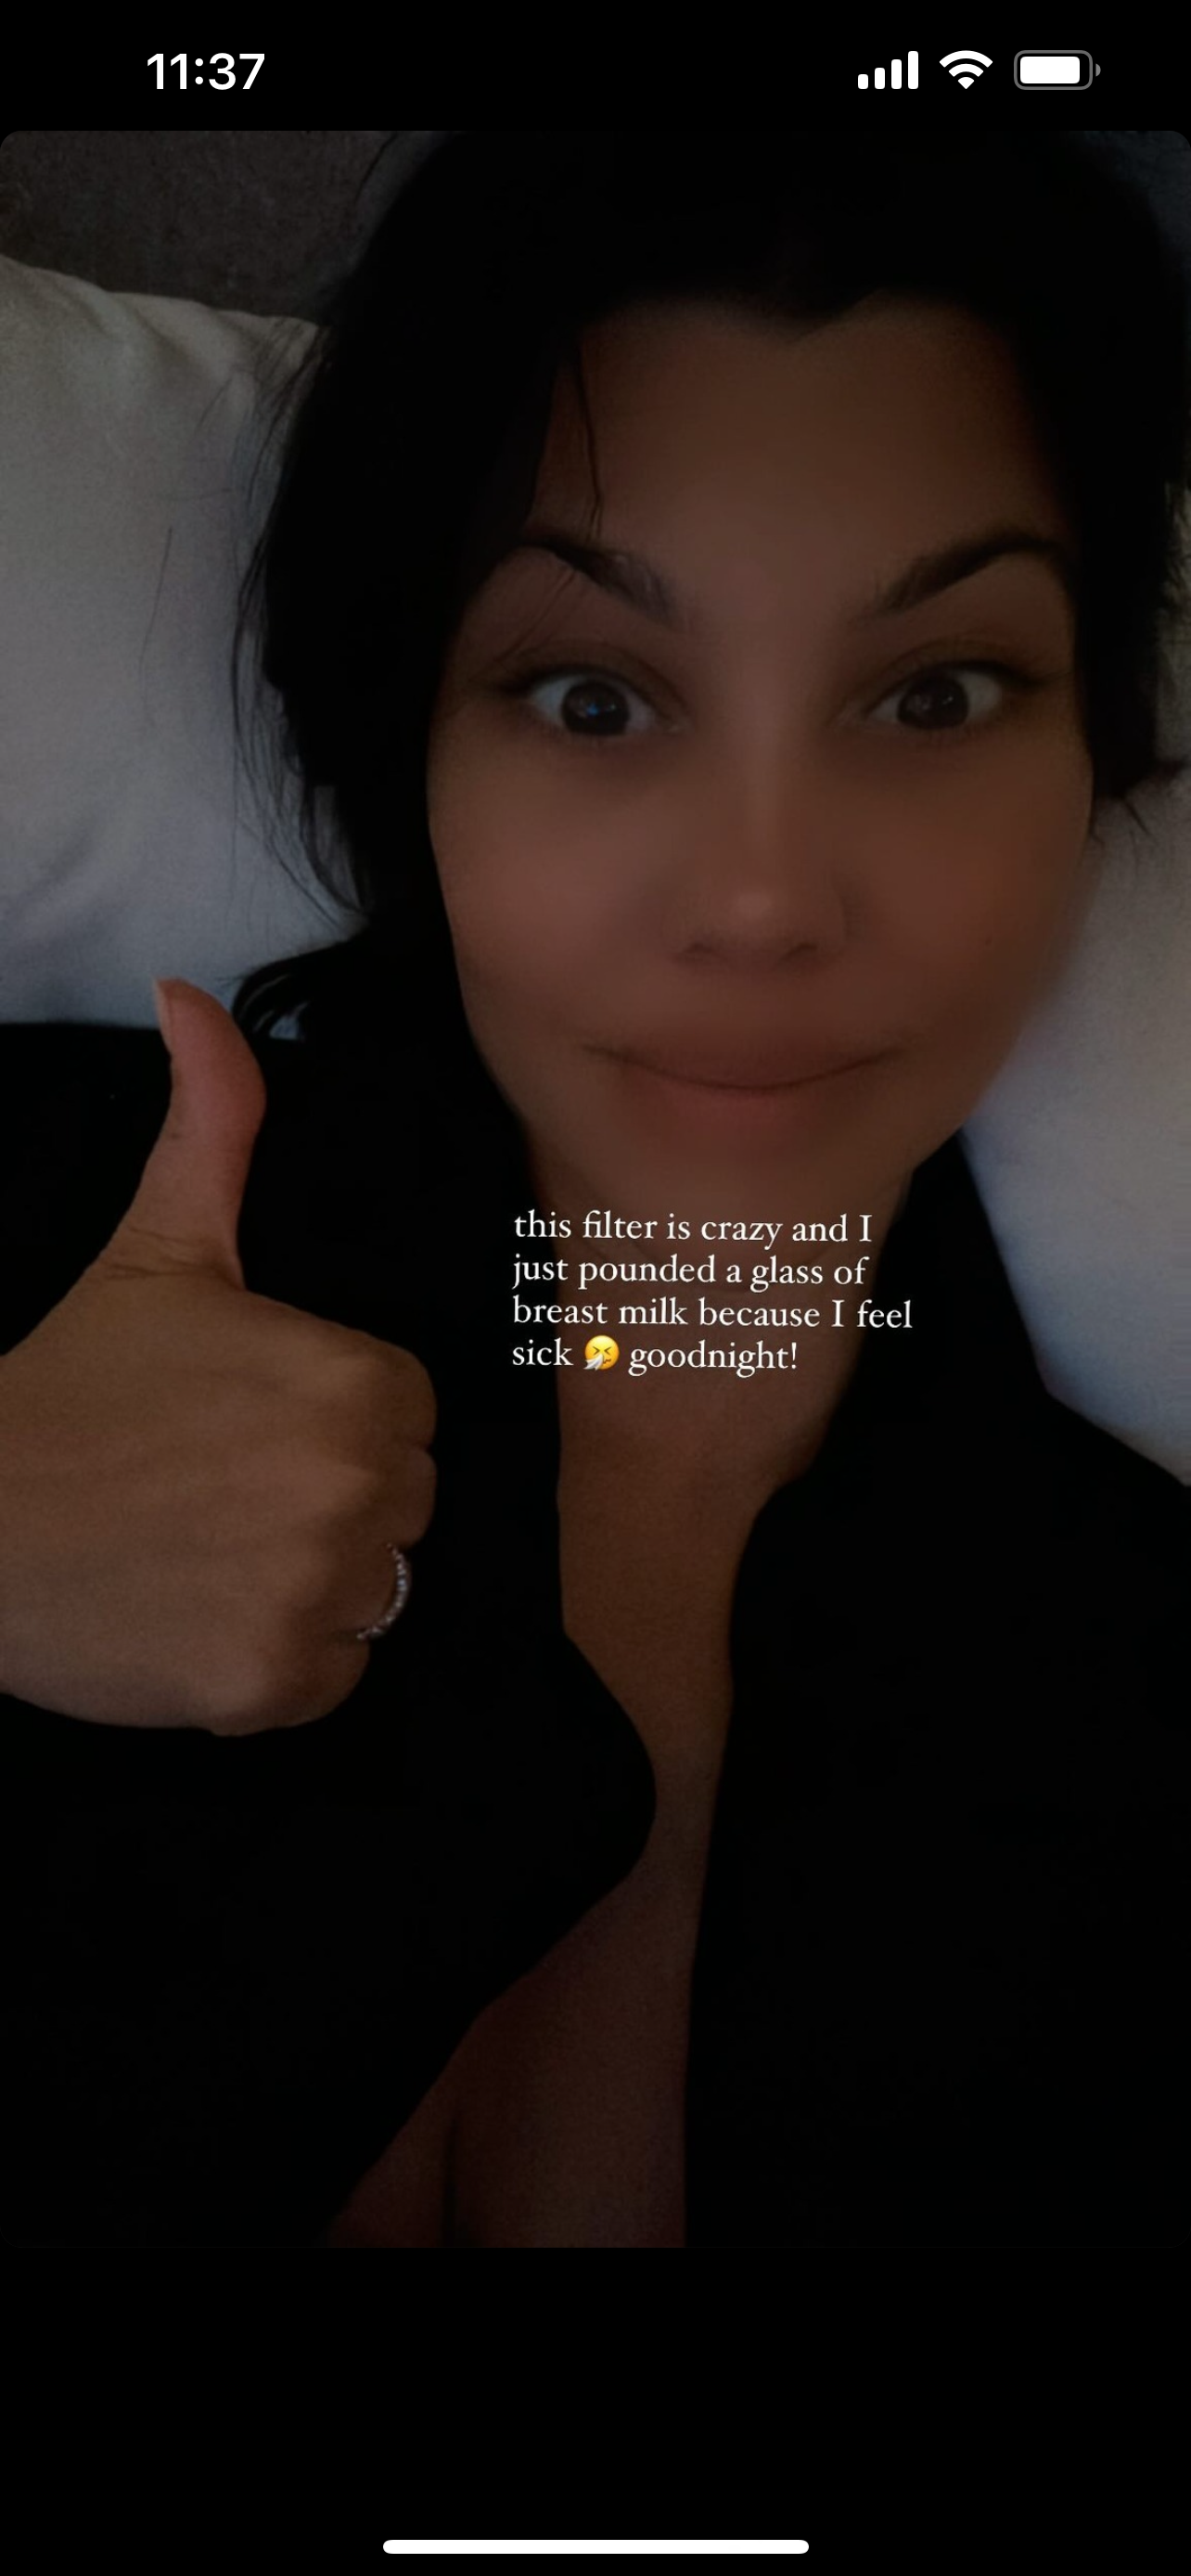 Why Kourtney Kardashian ‘pounded a glass of breast milk’ before bed